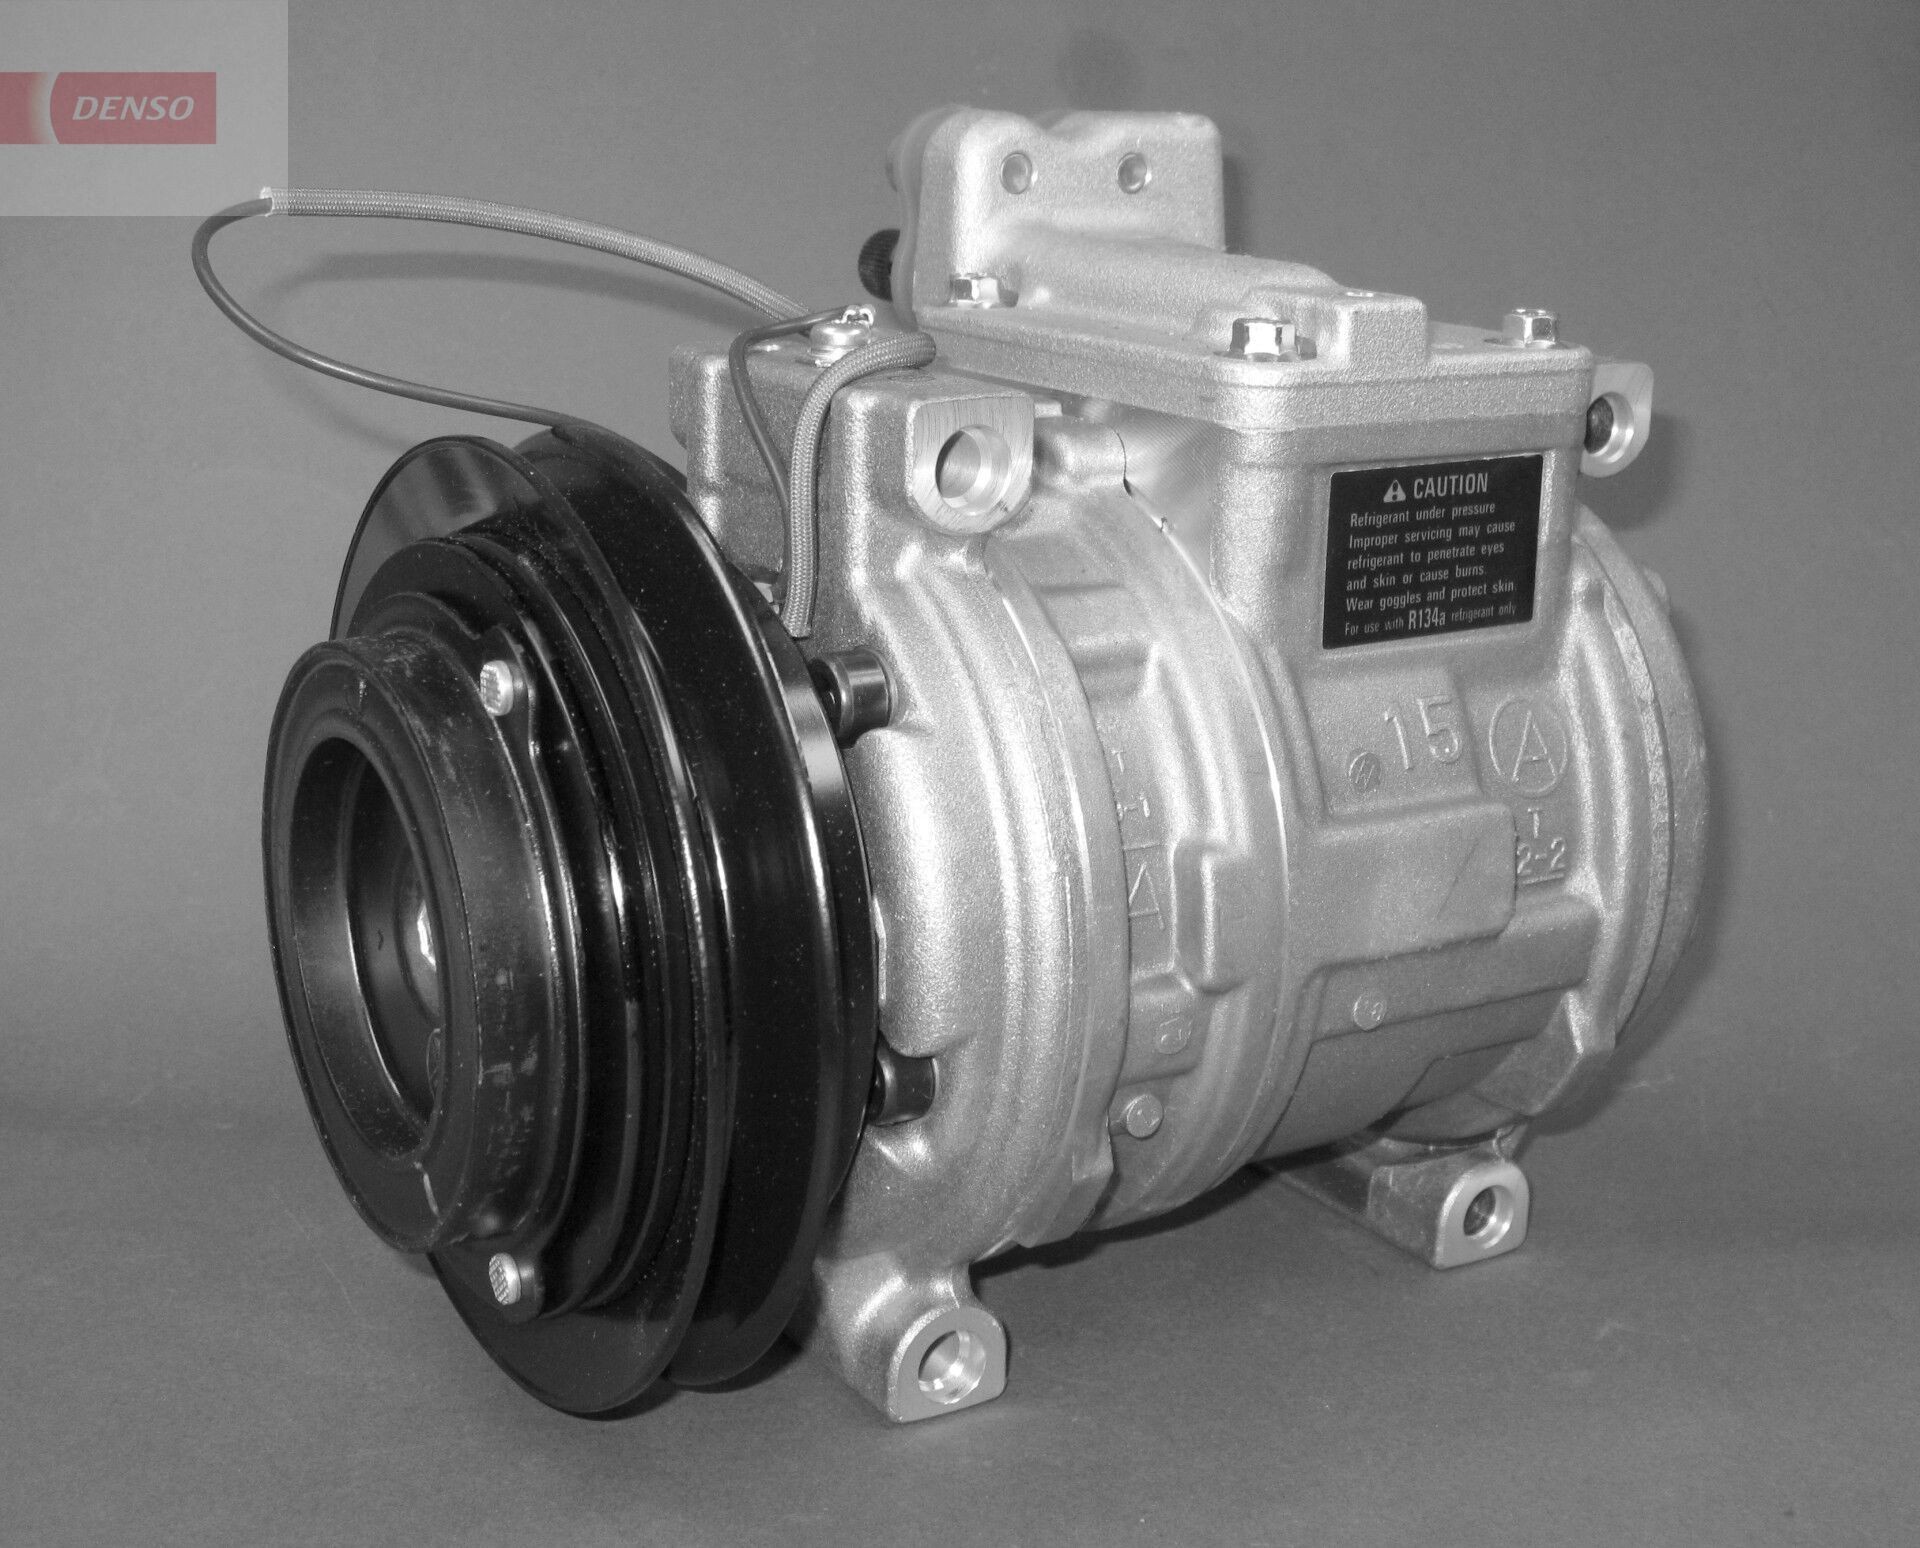 DENSO DCP23535 Air conditioning compressor 10PA15C, 12V, PAG 46, R 134a, with magnetic clutch